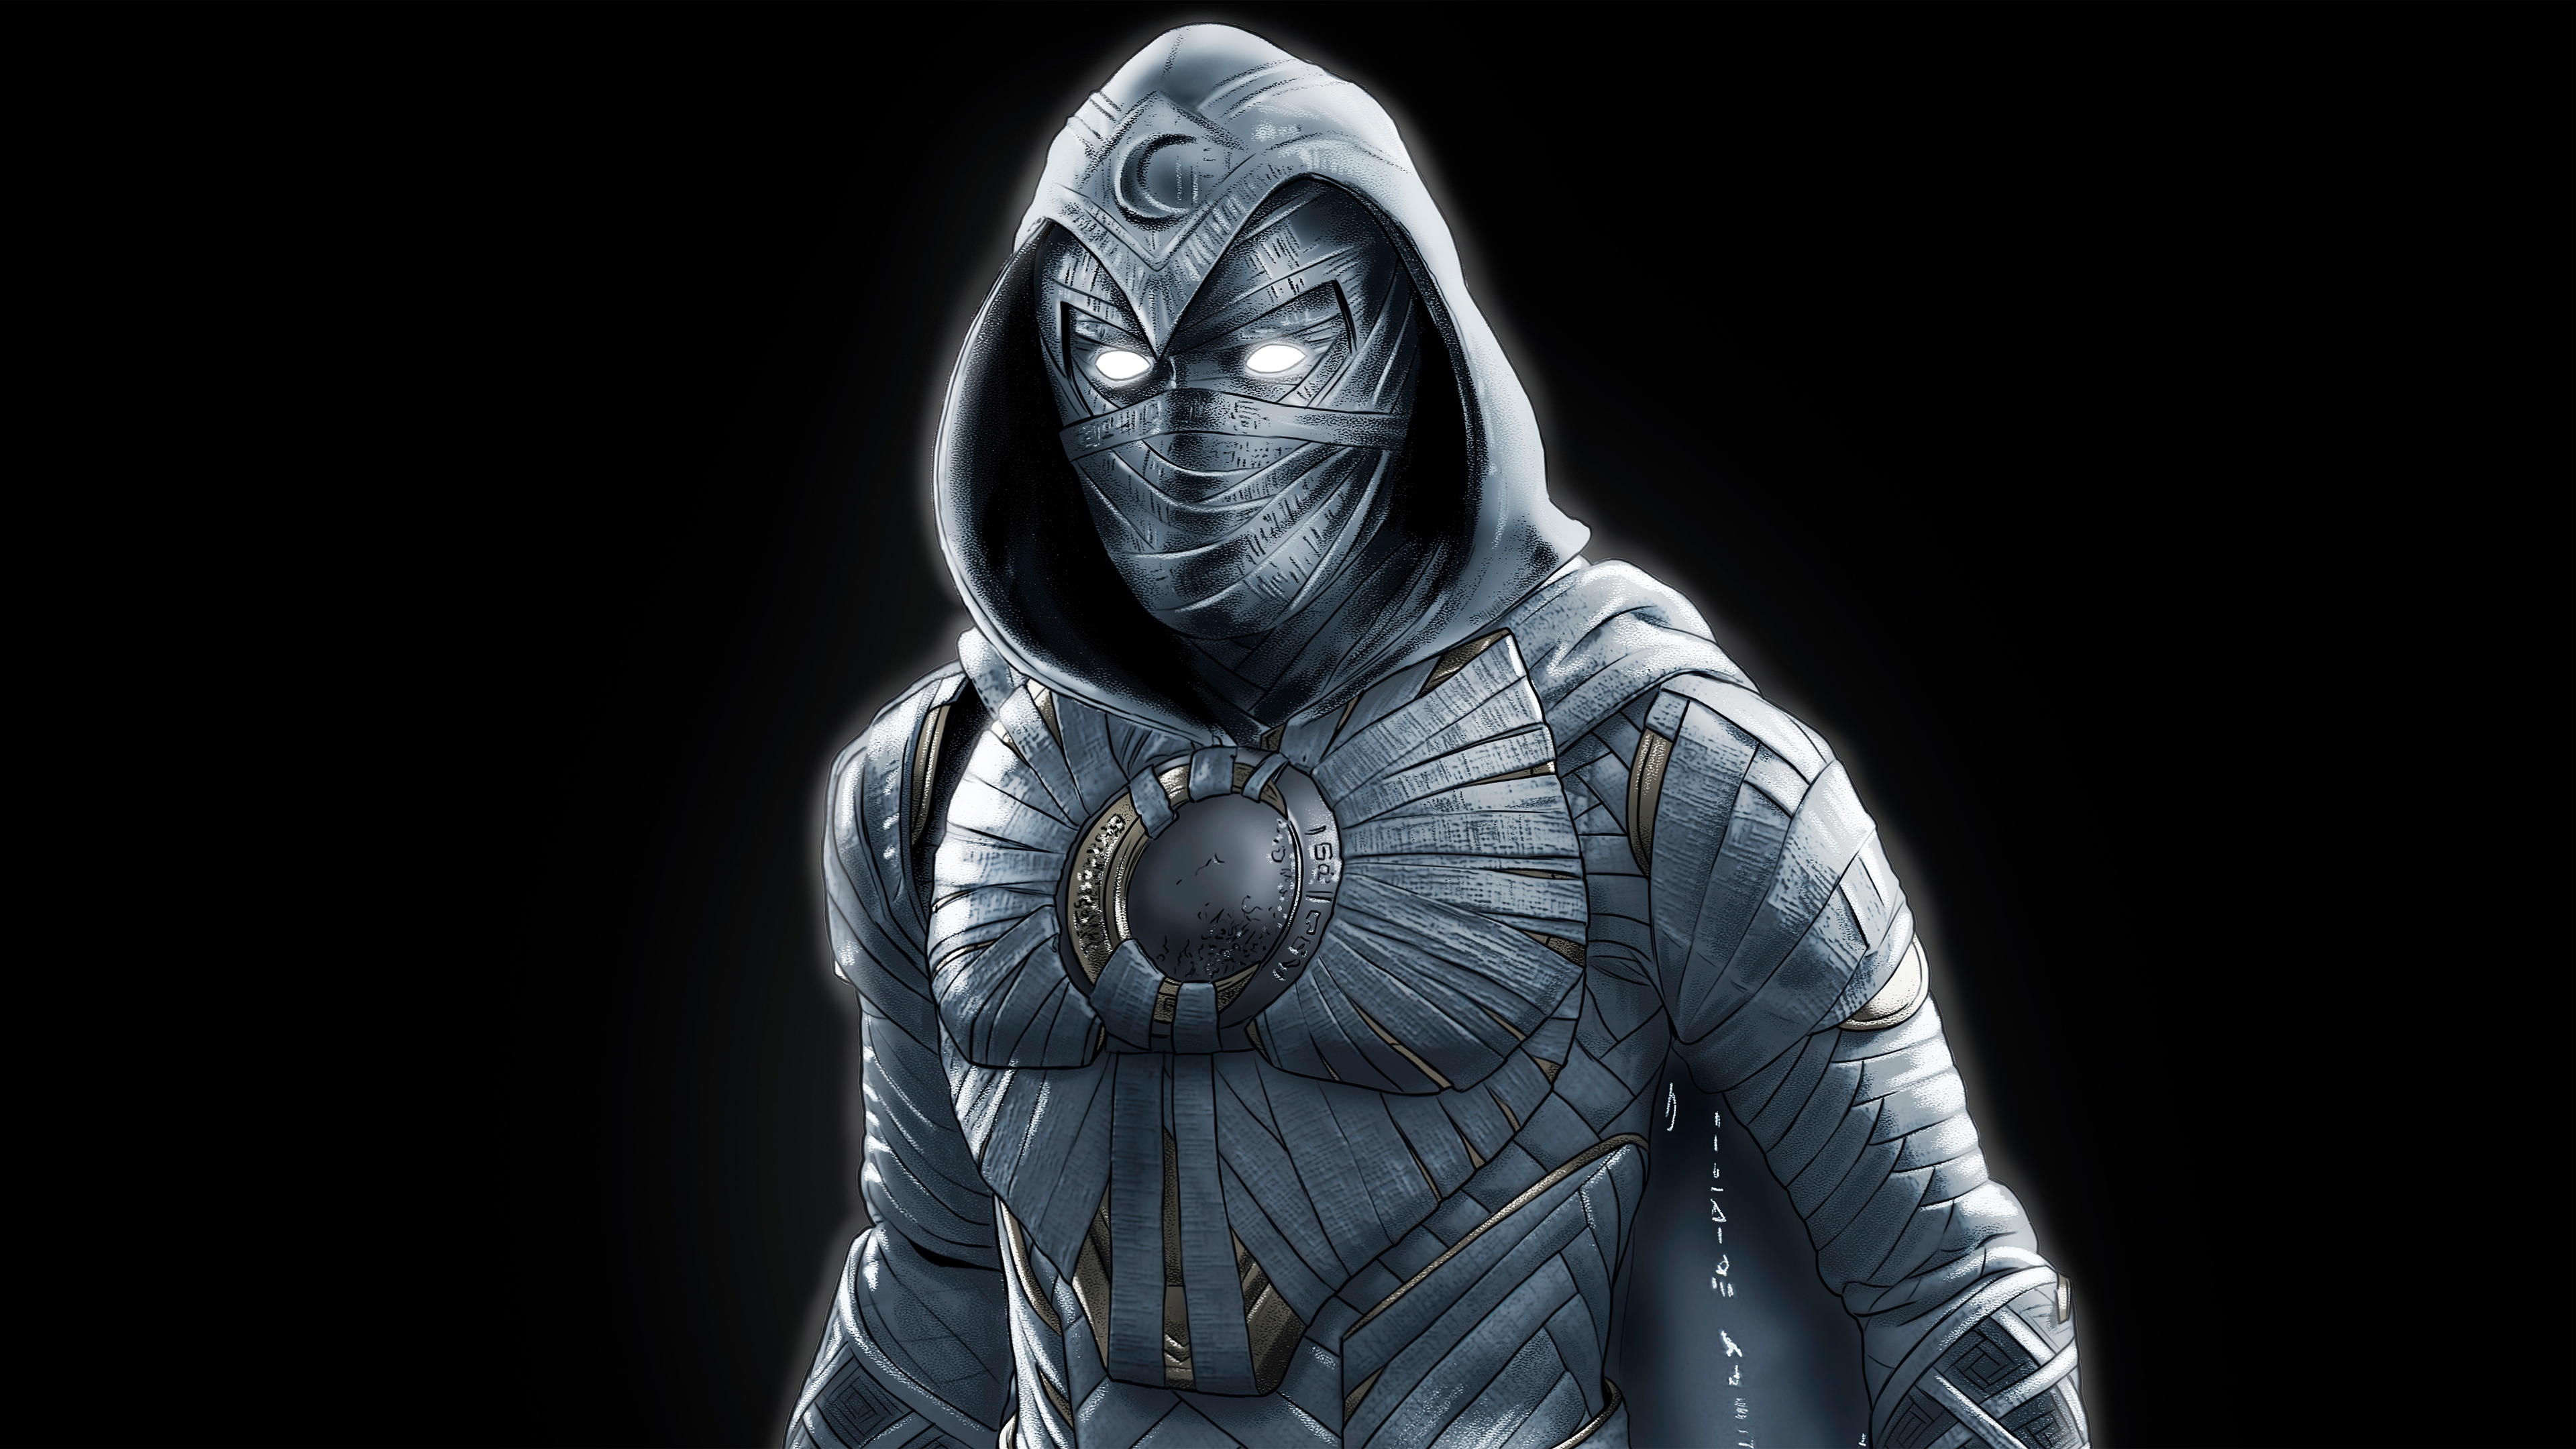 Moon Knight Wallpaper,HD Superheroes Wallpapers,4k Wallpapers,Images, Backgrounds,Photos and Pictures